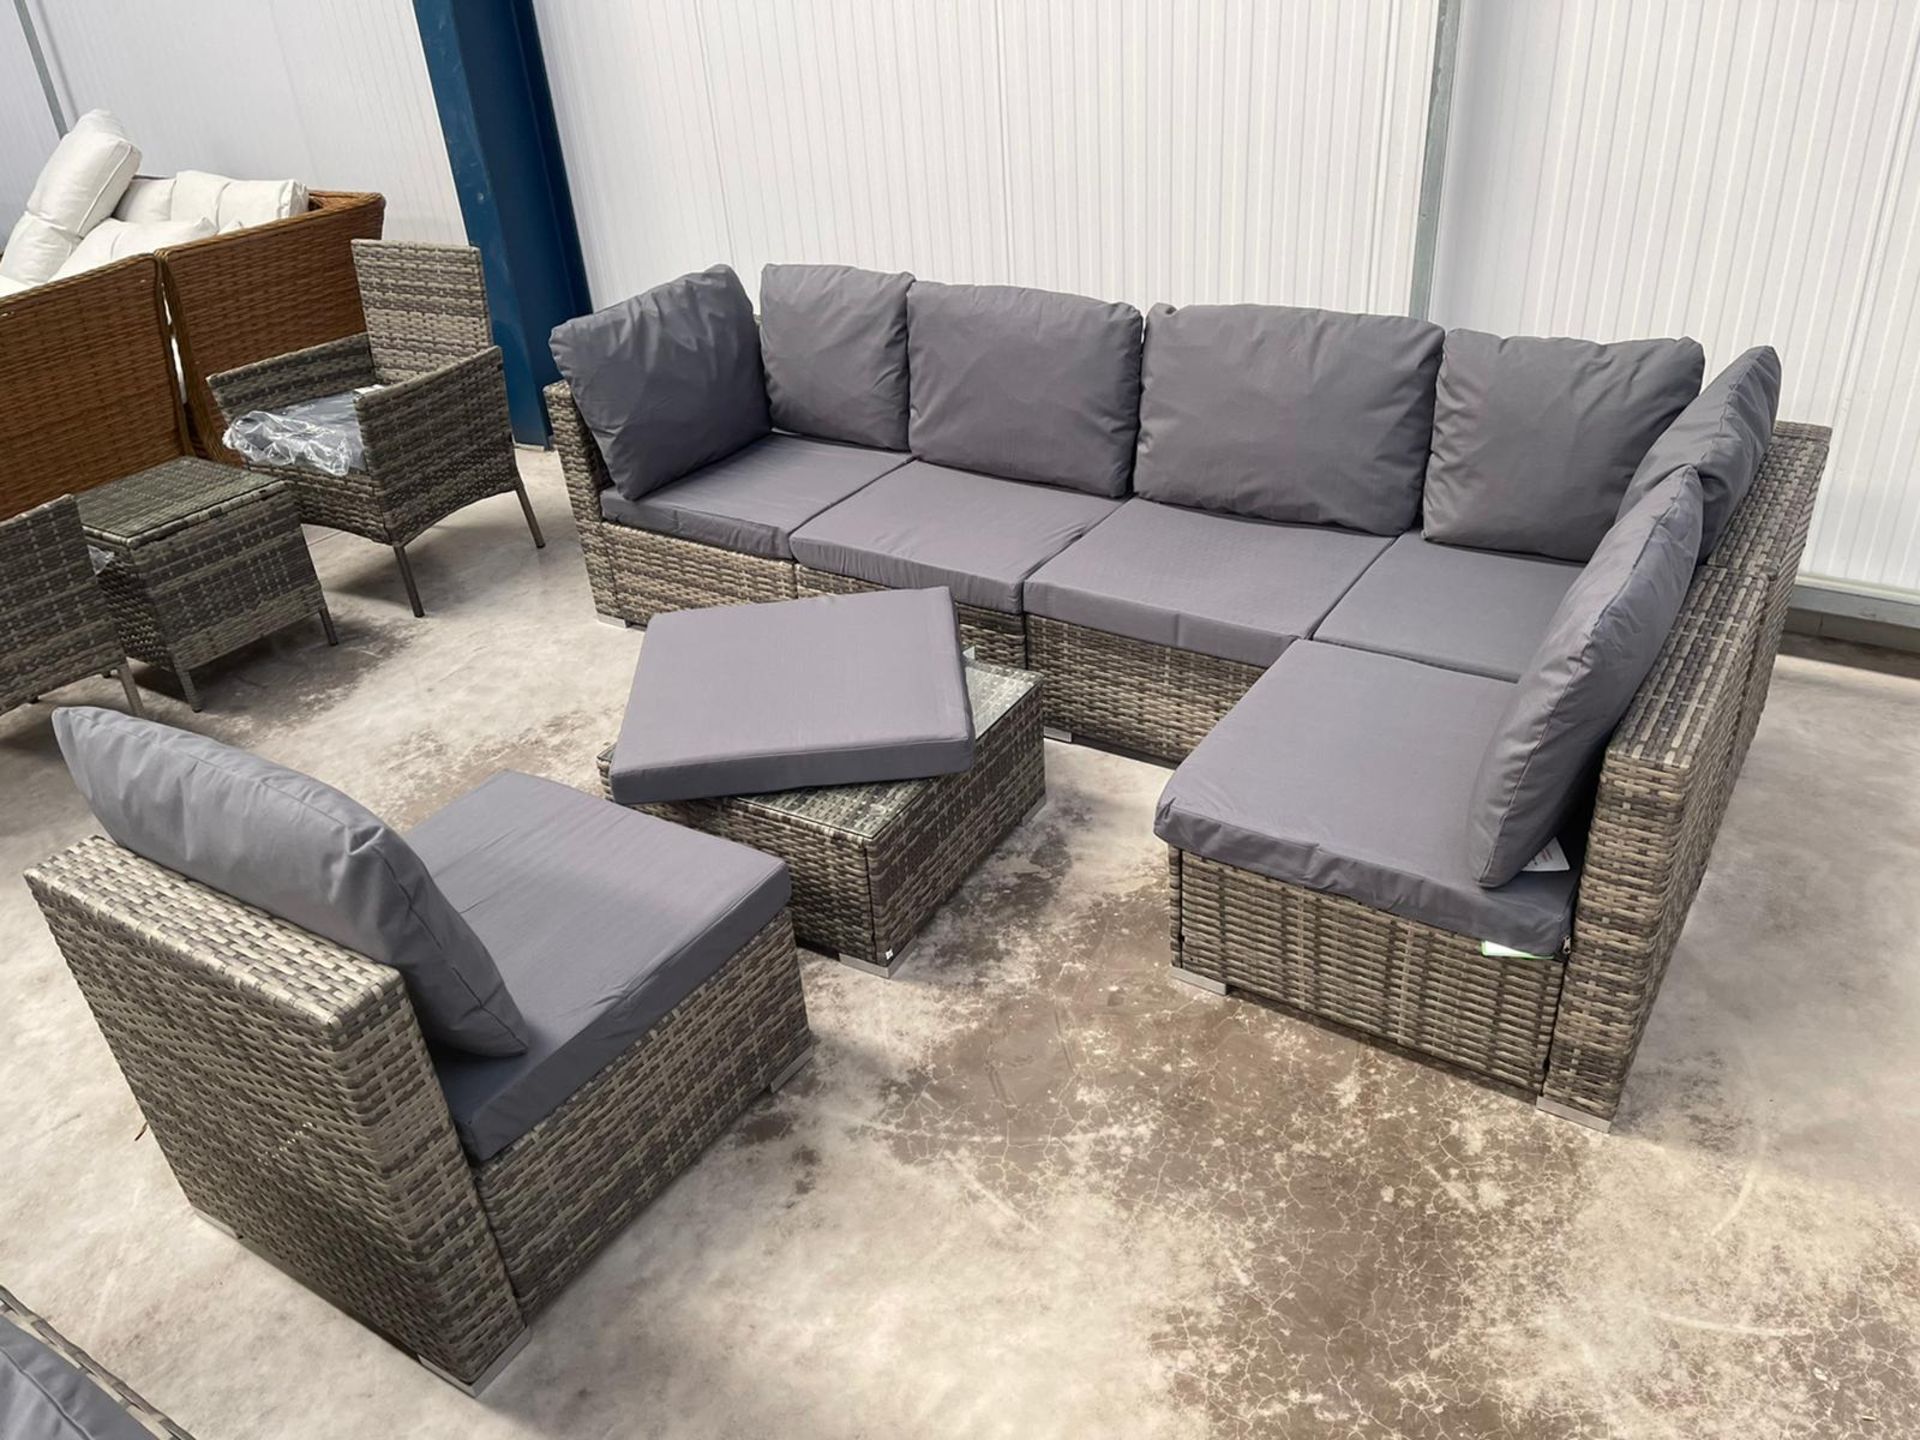 RRP £899 - NEW GREY U-SHAPED MODULAR SOFA WITH GLASS TOPPED COFFEE TABLE. VERY VERSITILE SET THAT - Image 9 of 9